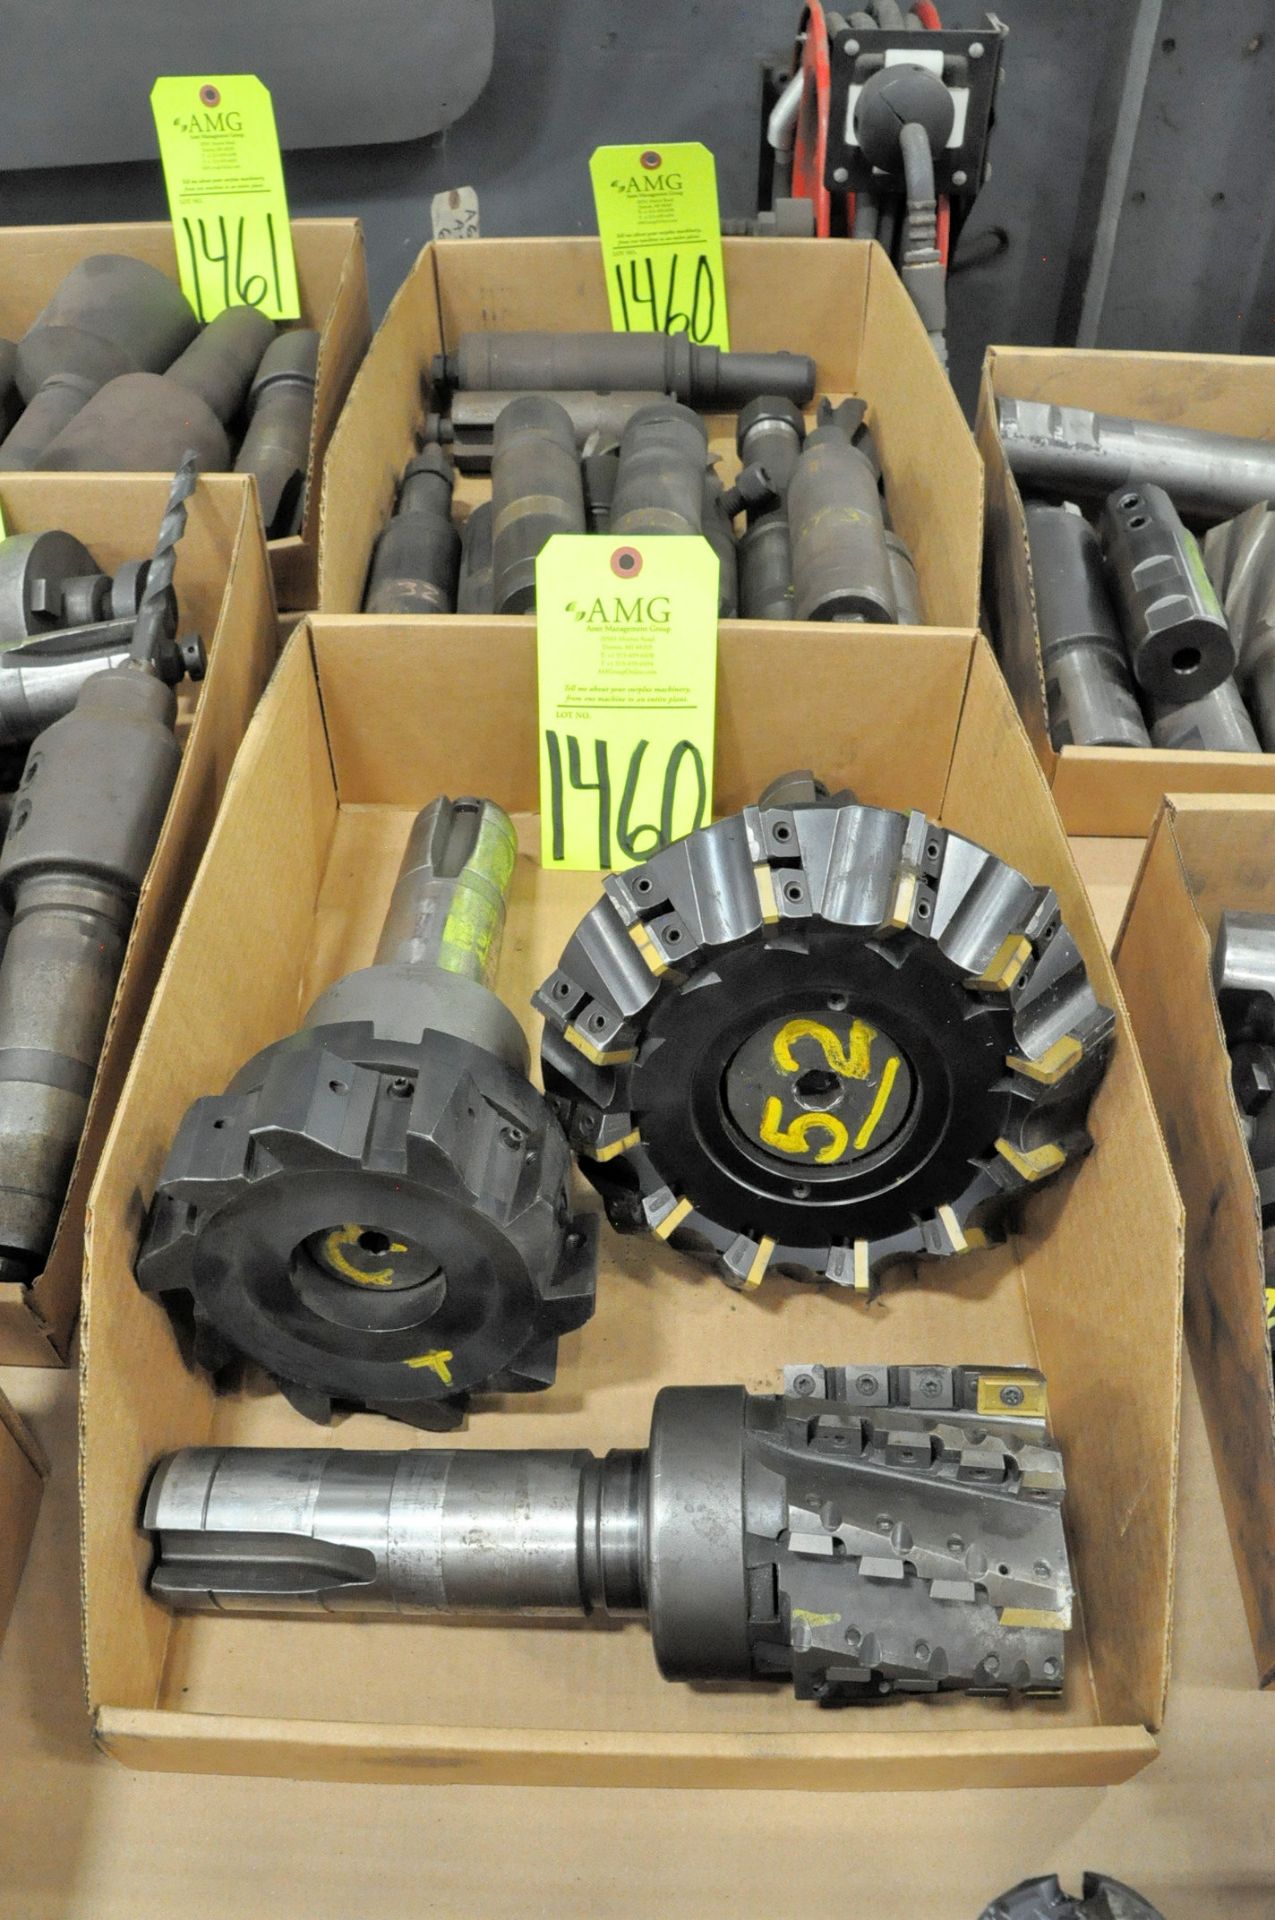 Lot-Face Mills and Holders in (2) Boxes, (E-7), (Yellow Tag)